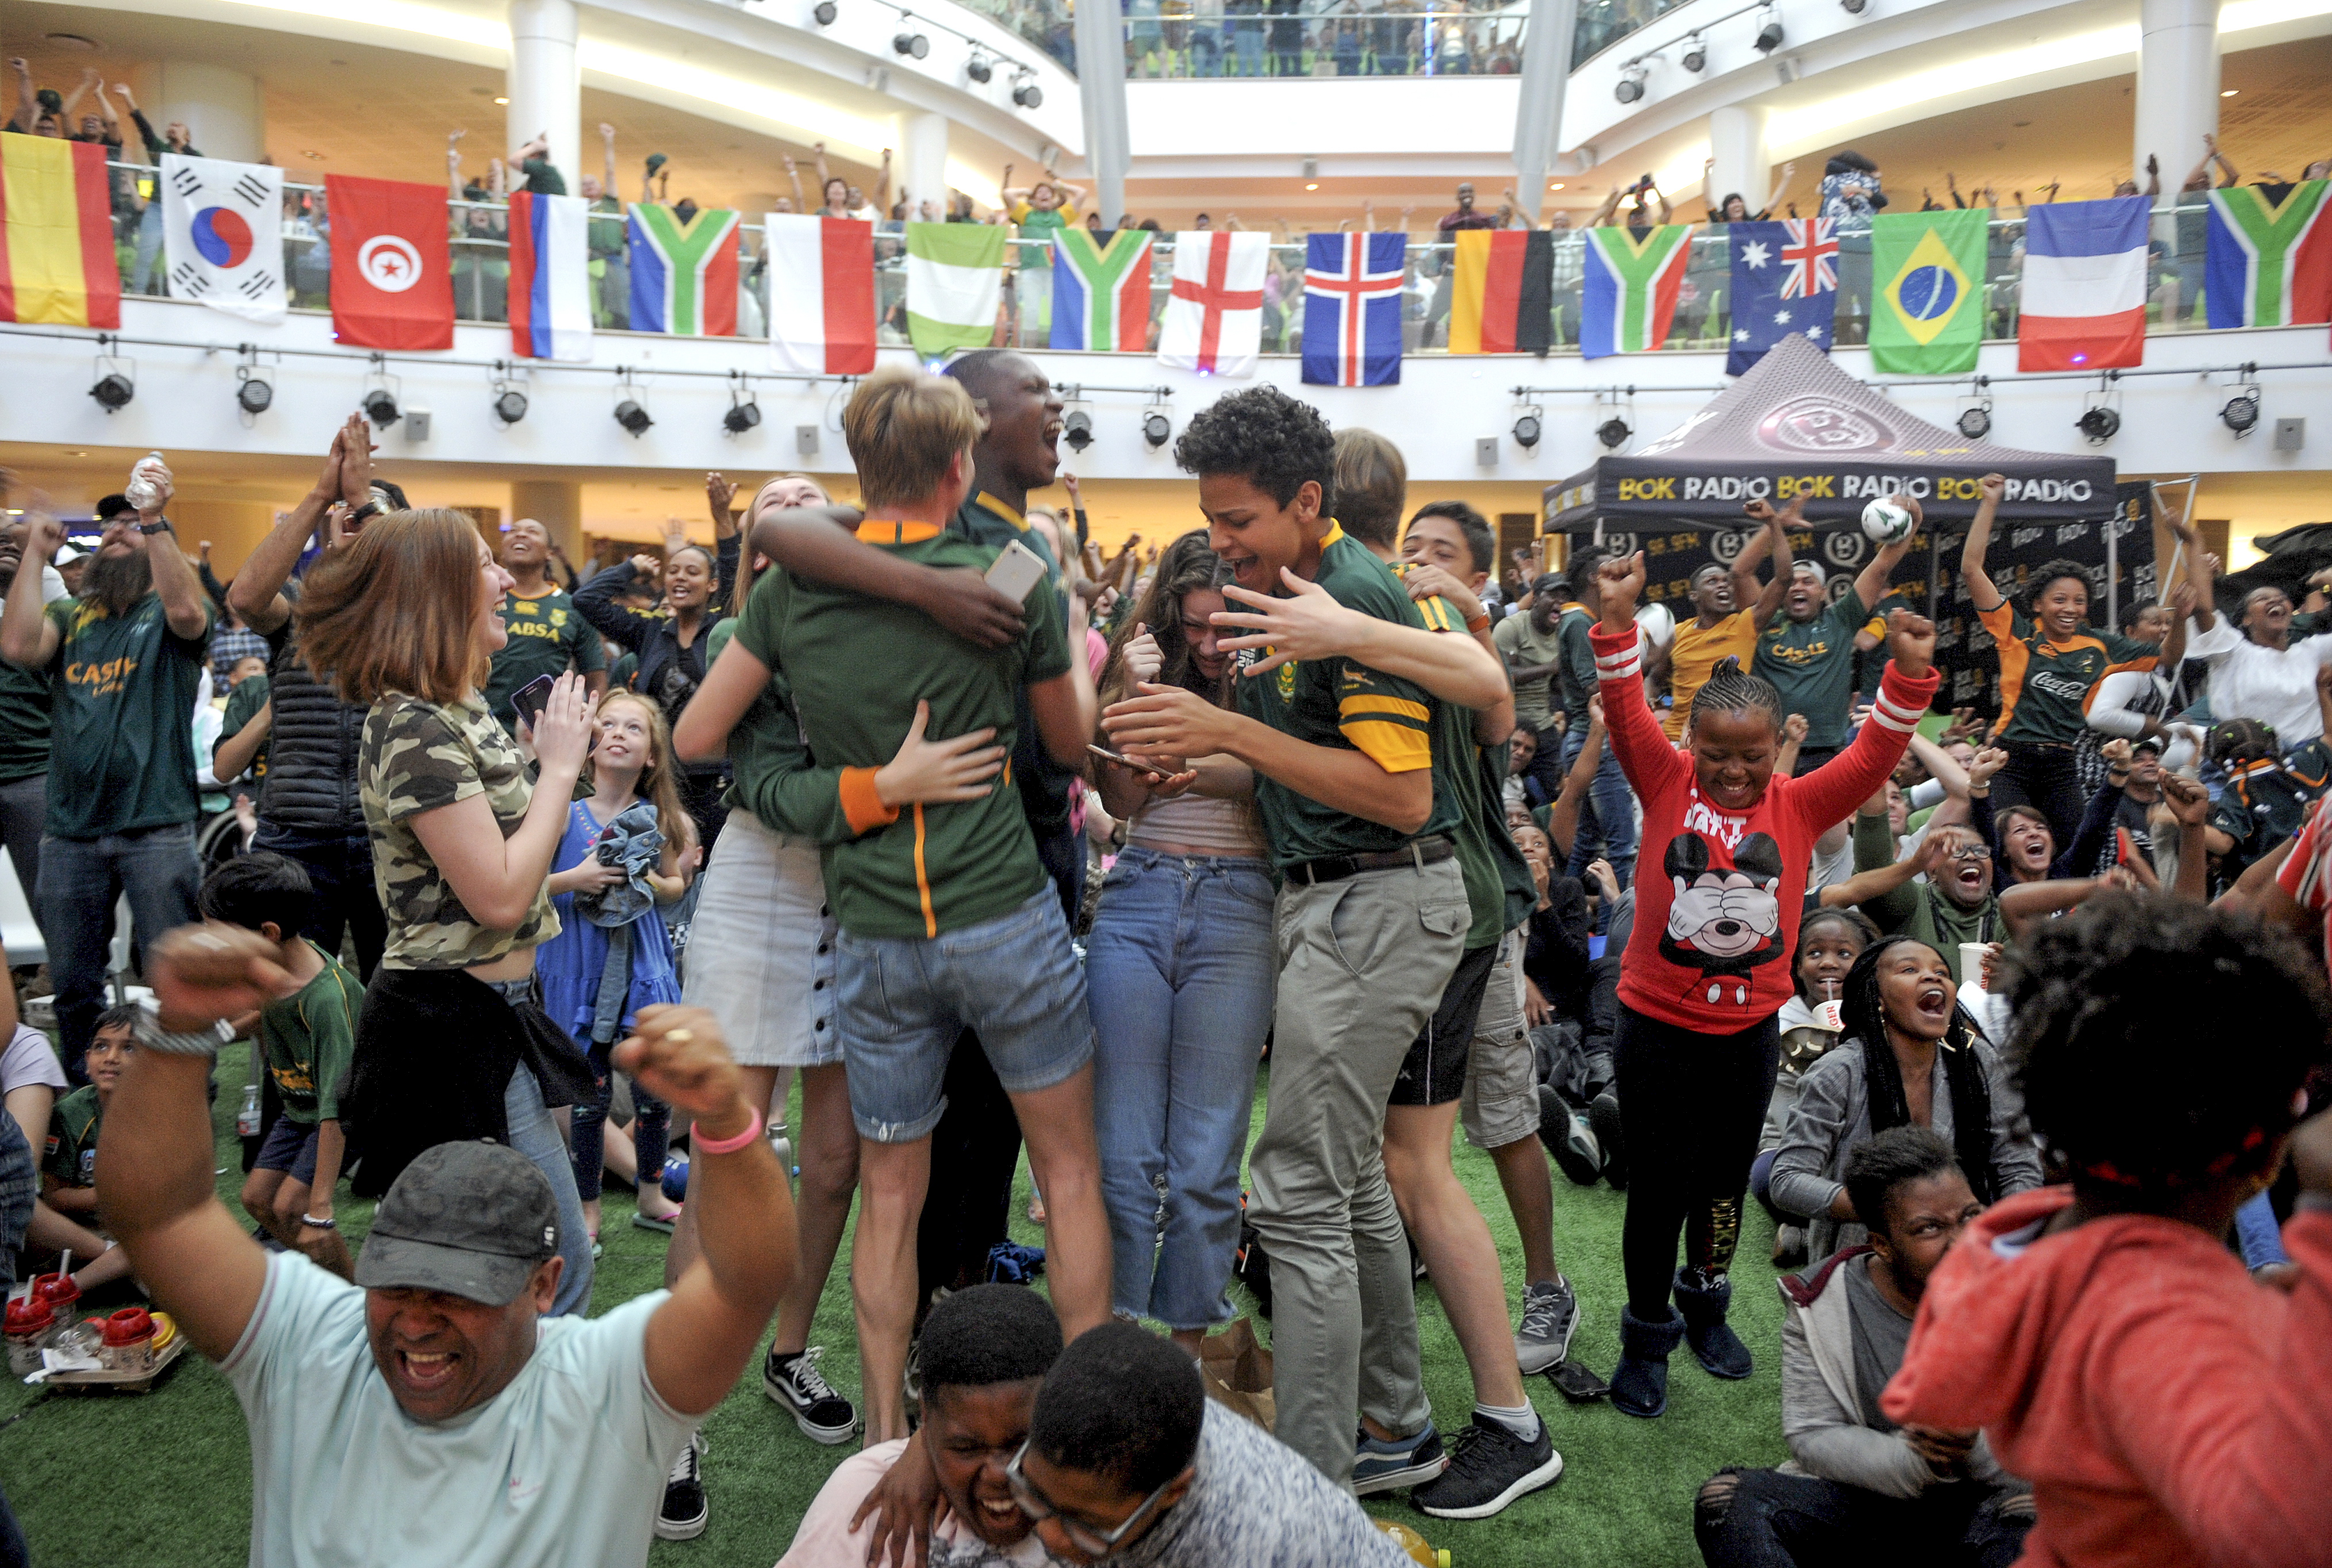 epa07966828 South African fans celebrate winning the rugby World Cup final between England and South Africa played in Japan, at a big screen broadcast in Tygervalley Mall, Cape Town, South Africa, 02 November 2019. South Africa beat England 32-12. EPA/STR